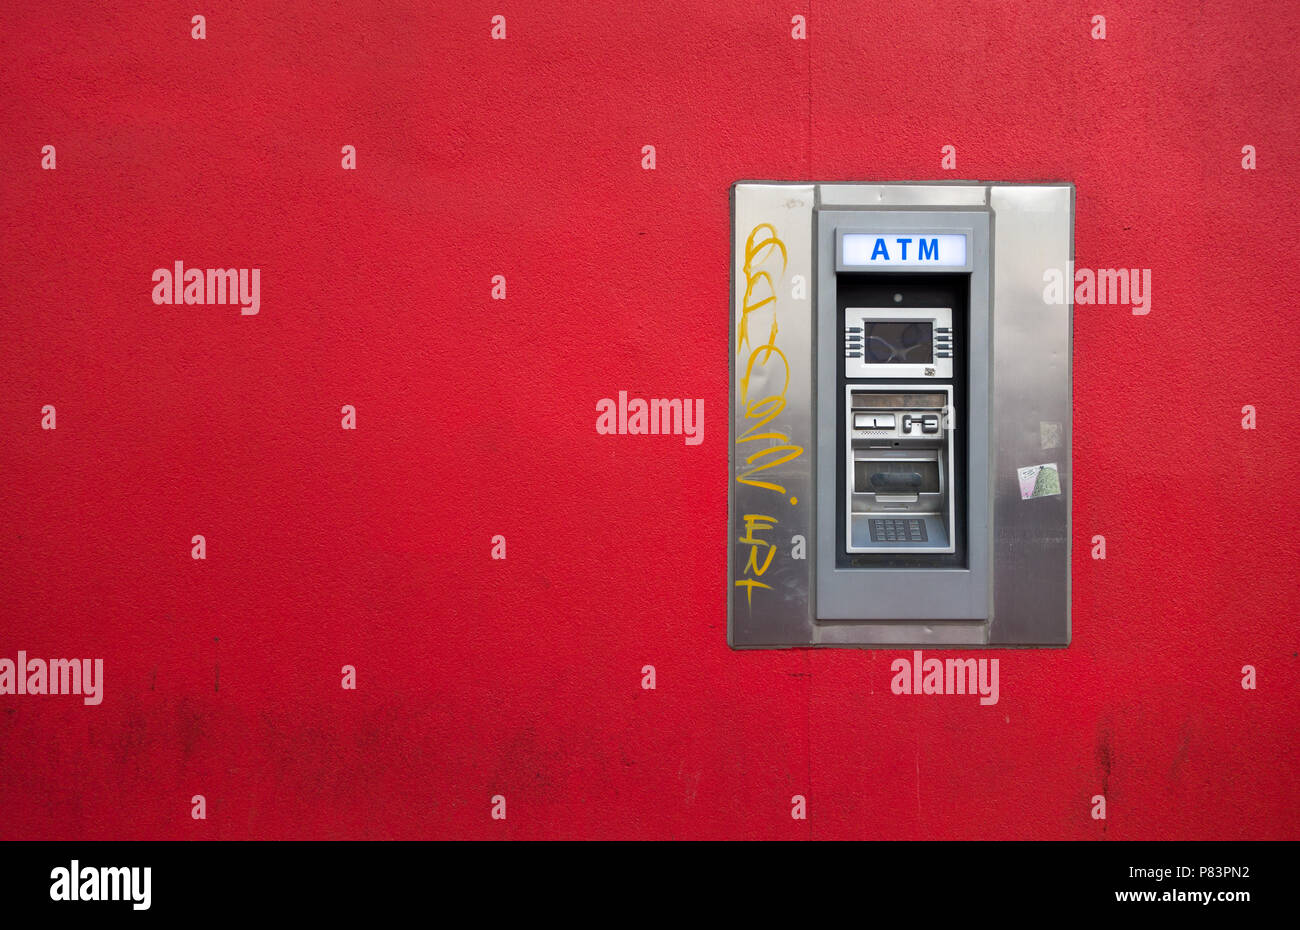 An automated teller machine (ATM) is a stark contrast on the bright red wall where it is mounted.  Toronto, Ontario, Canada Stock Photo